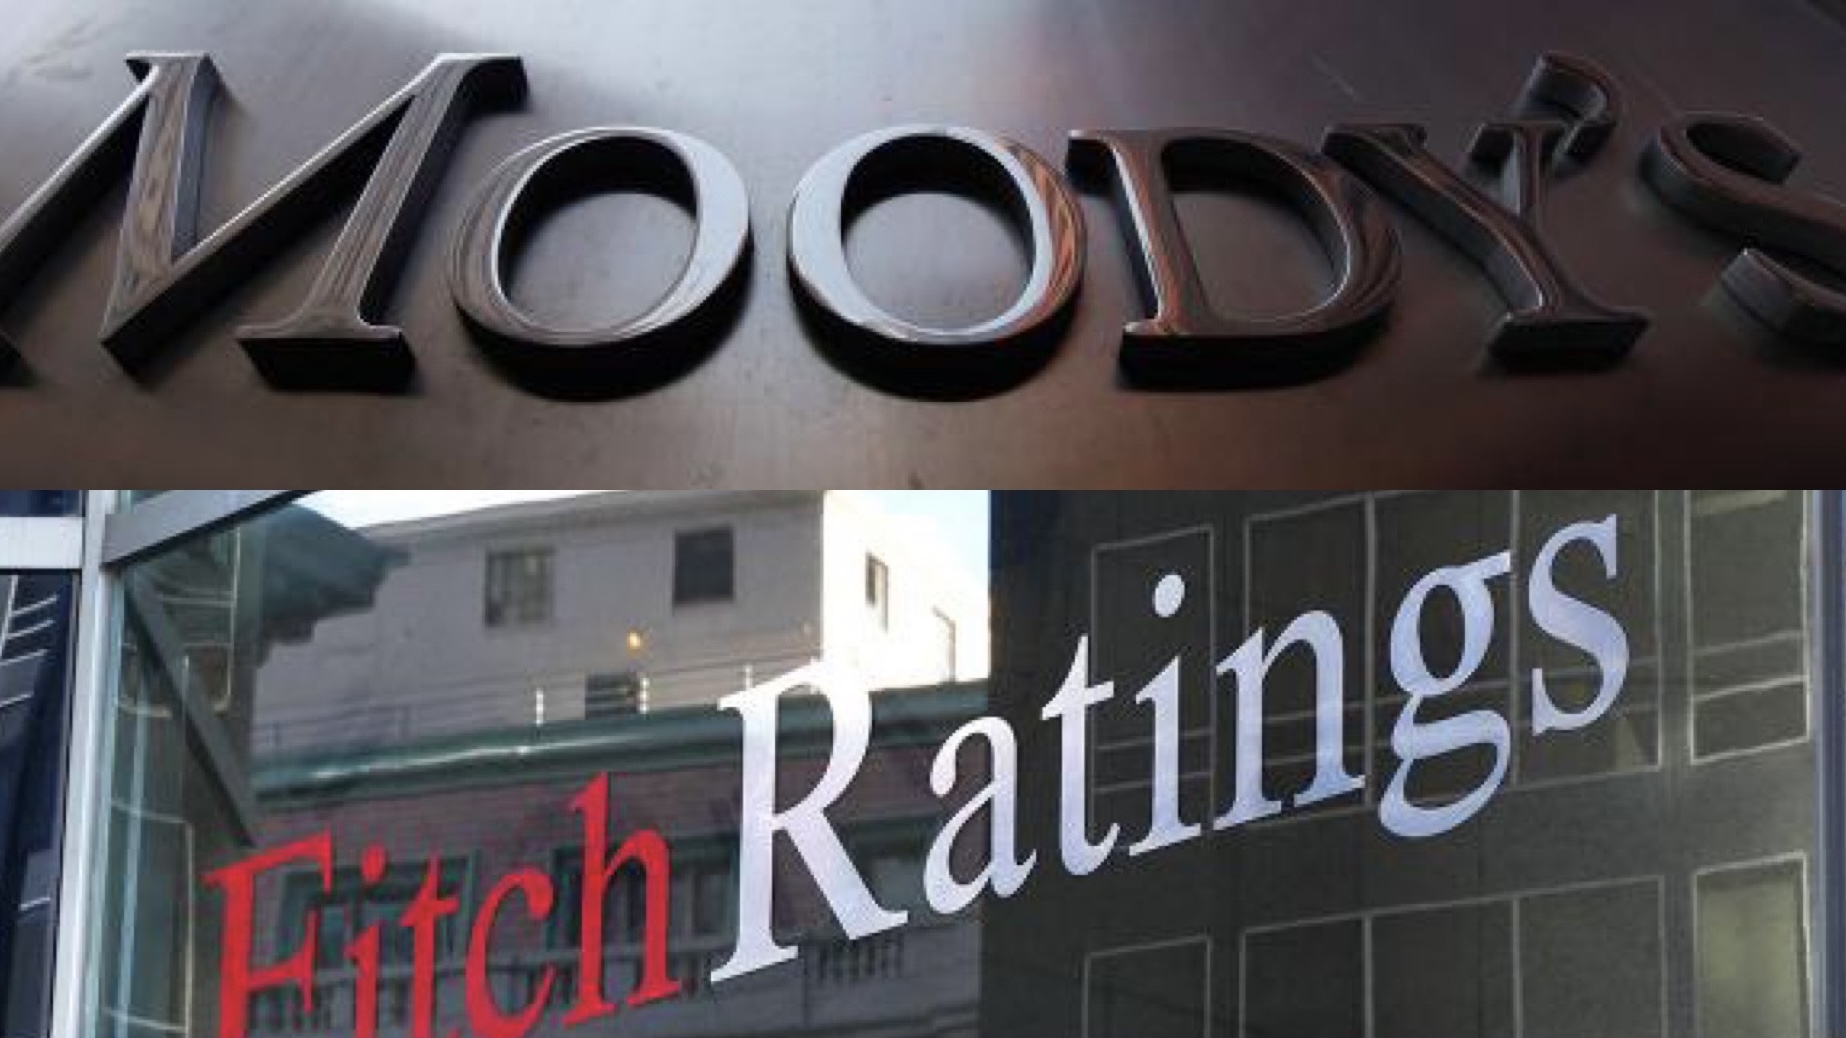 Moody's - Fitch Ratings